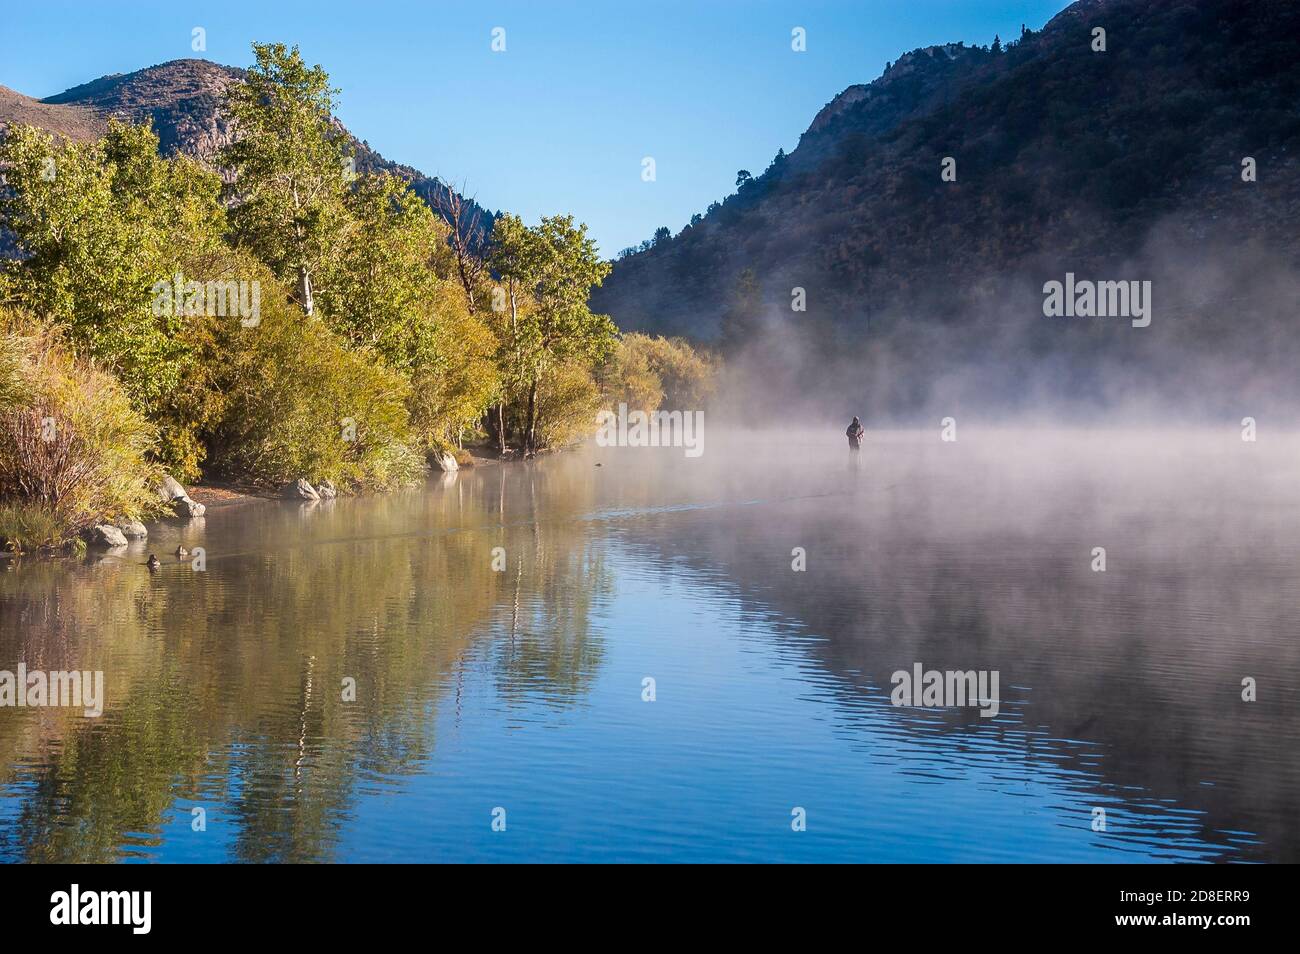 A man fishes in the early morning as steam blankets the water. Stock Photo